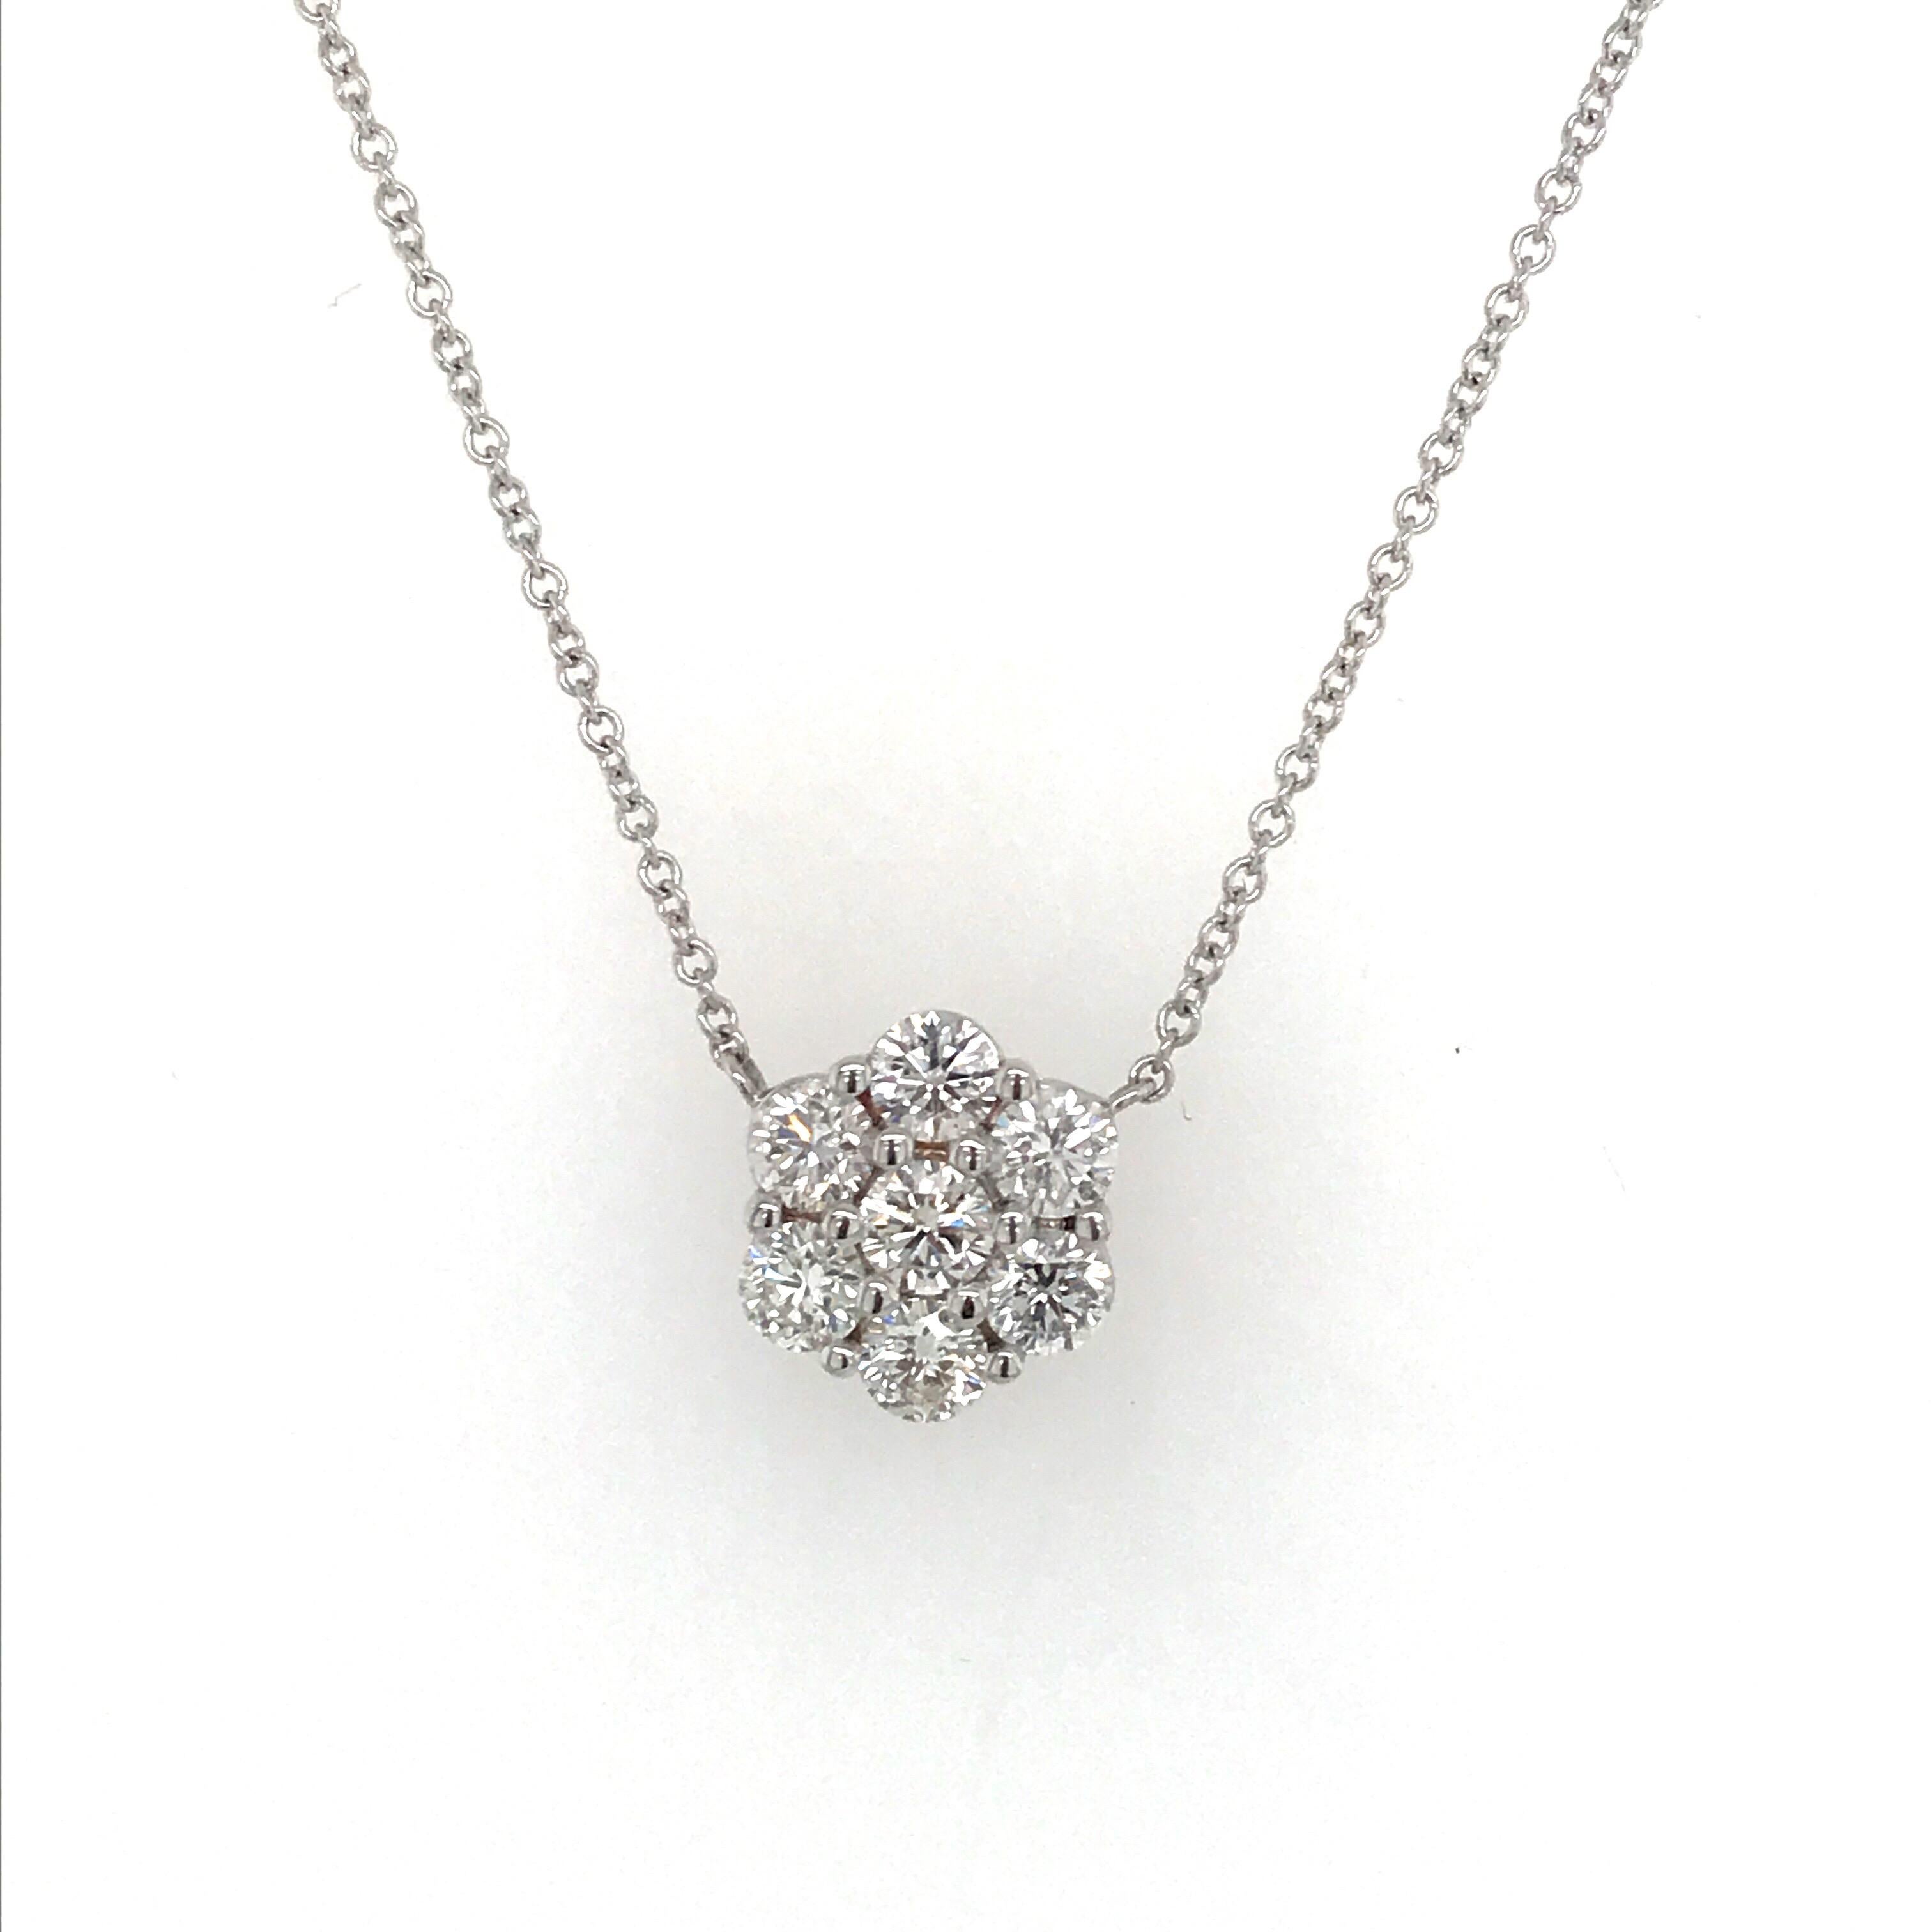 18K White Gold diamond cluster pendant featuring 7 round brilliants weighing 1.33 carats extended on a 16 inch chain. 
A timeless piece of jewelry. 
Available in earrings. 
Color: G-H
Clarity SI2